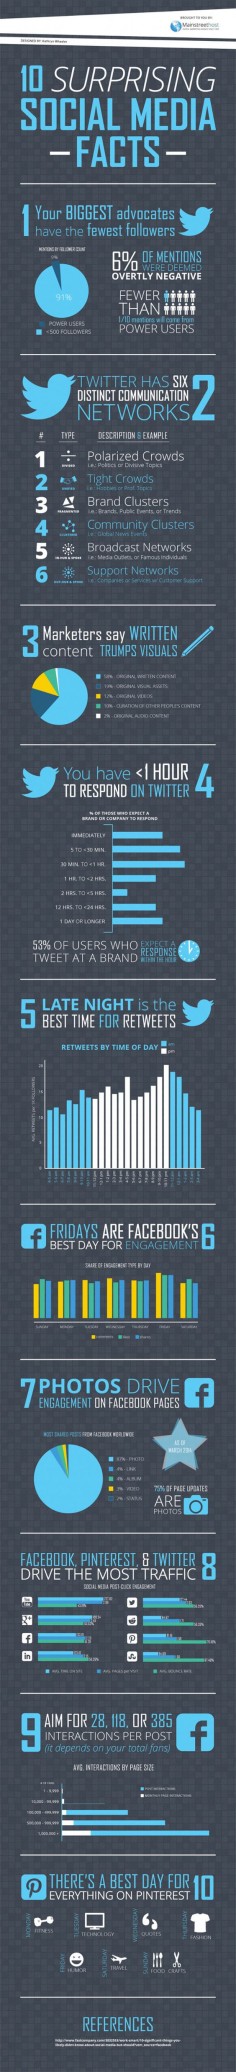 1 min read 10 Surprising Things You Should Know About #SocialMedia (#Infographic)